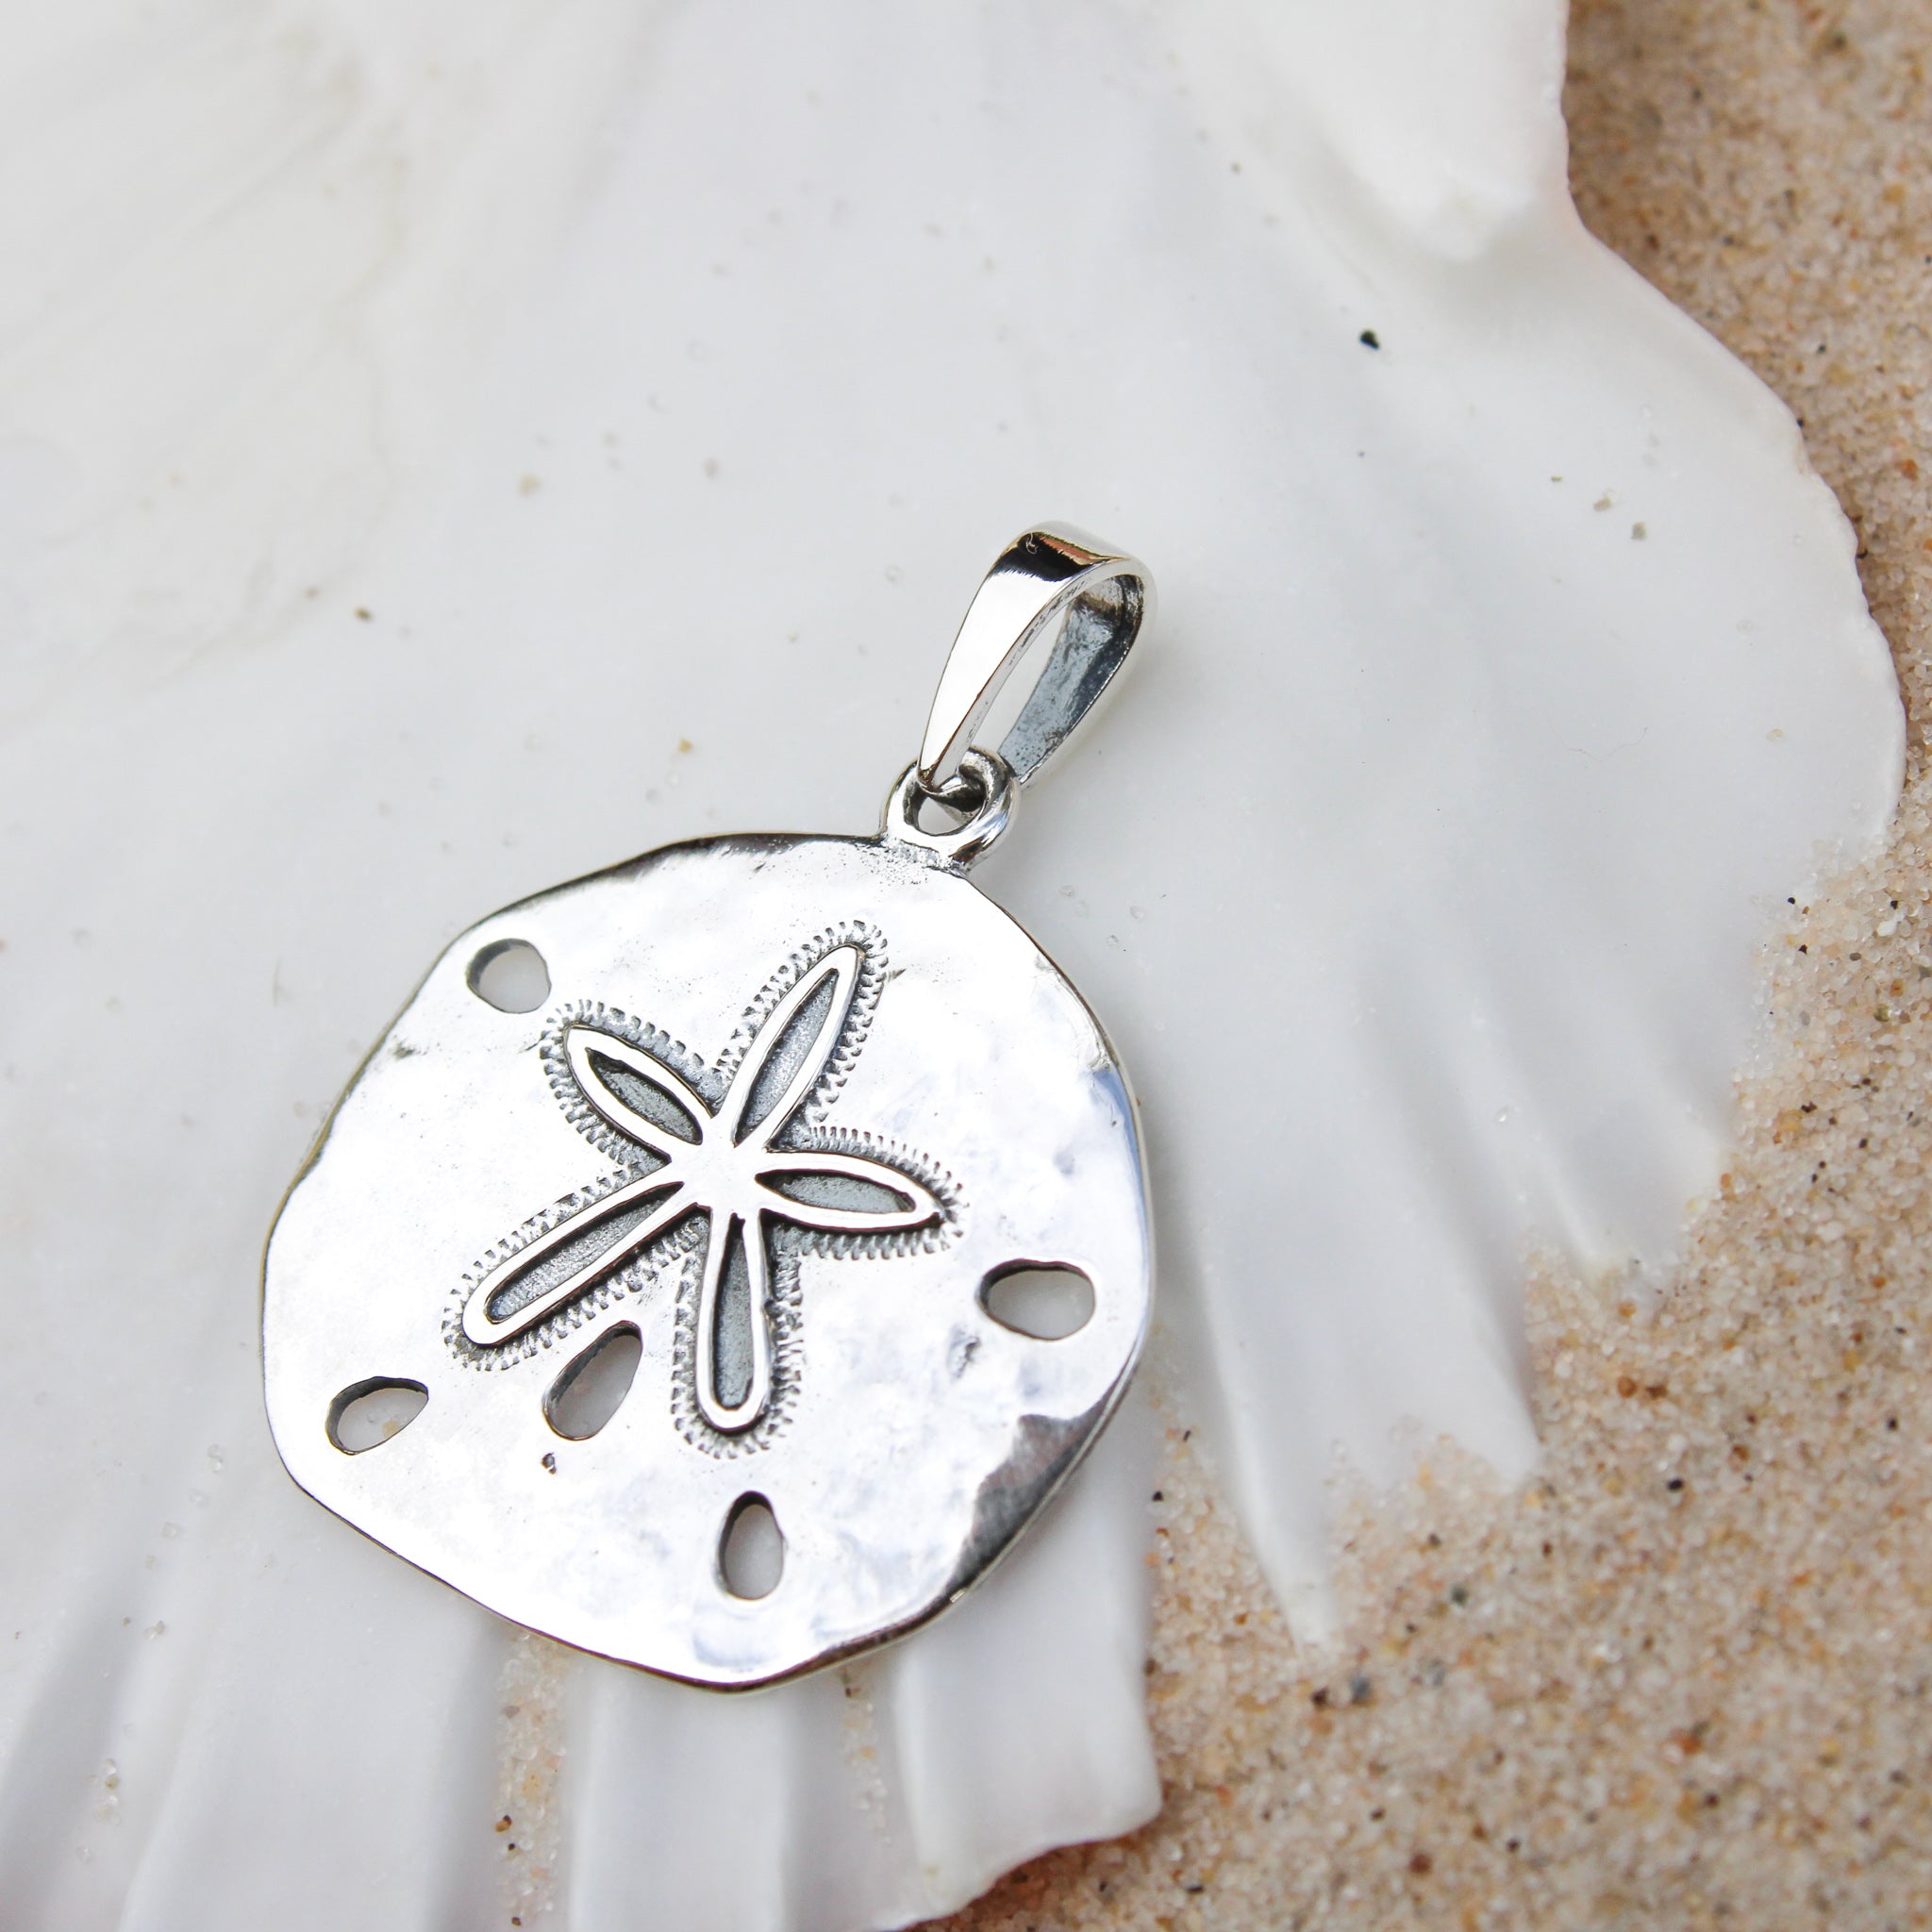 beach comber Sterling Silver Pacific Coast Sand Dollar Necklace